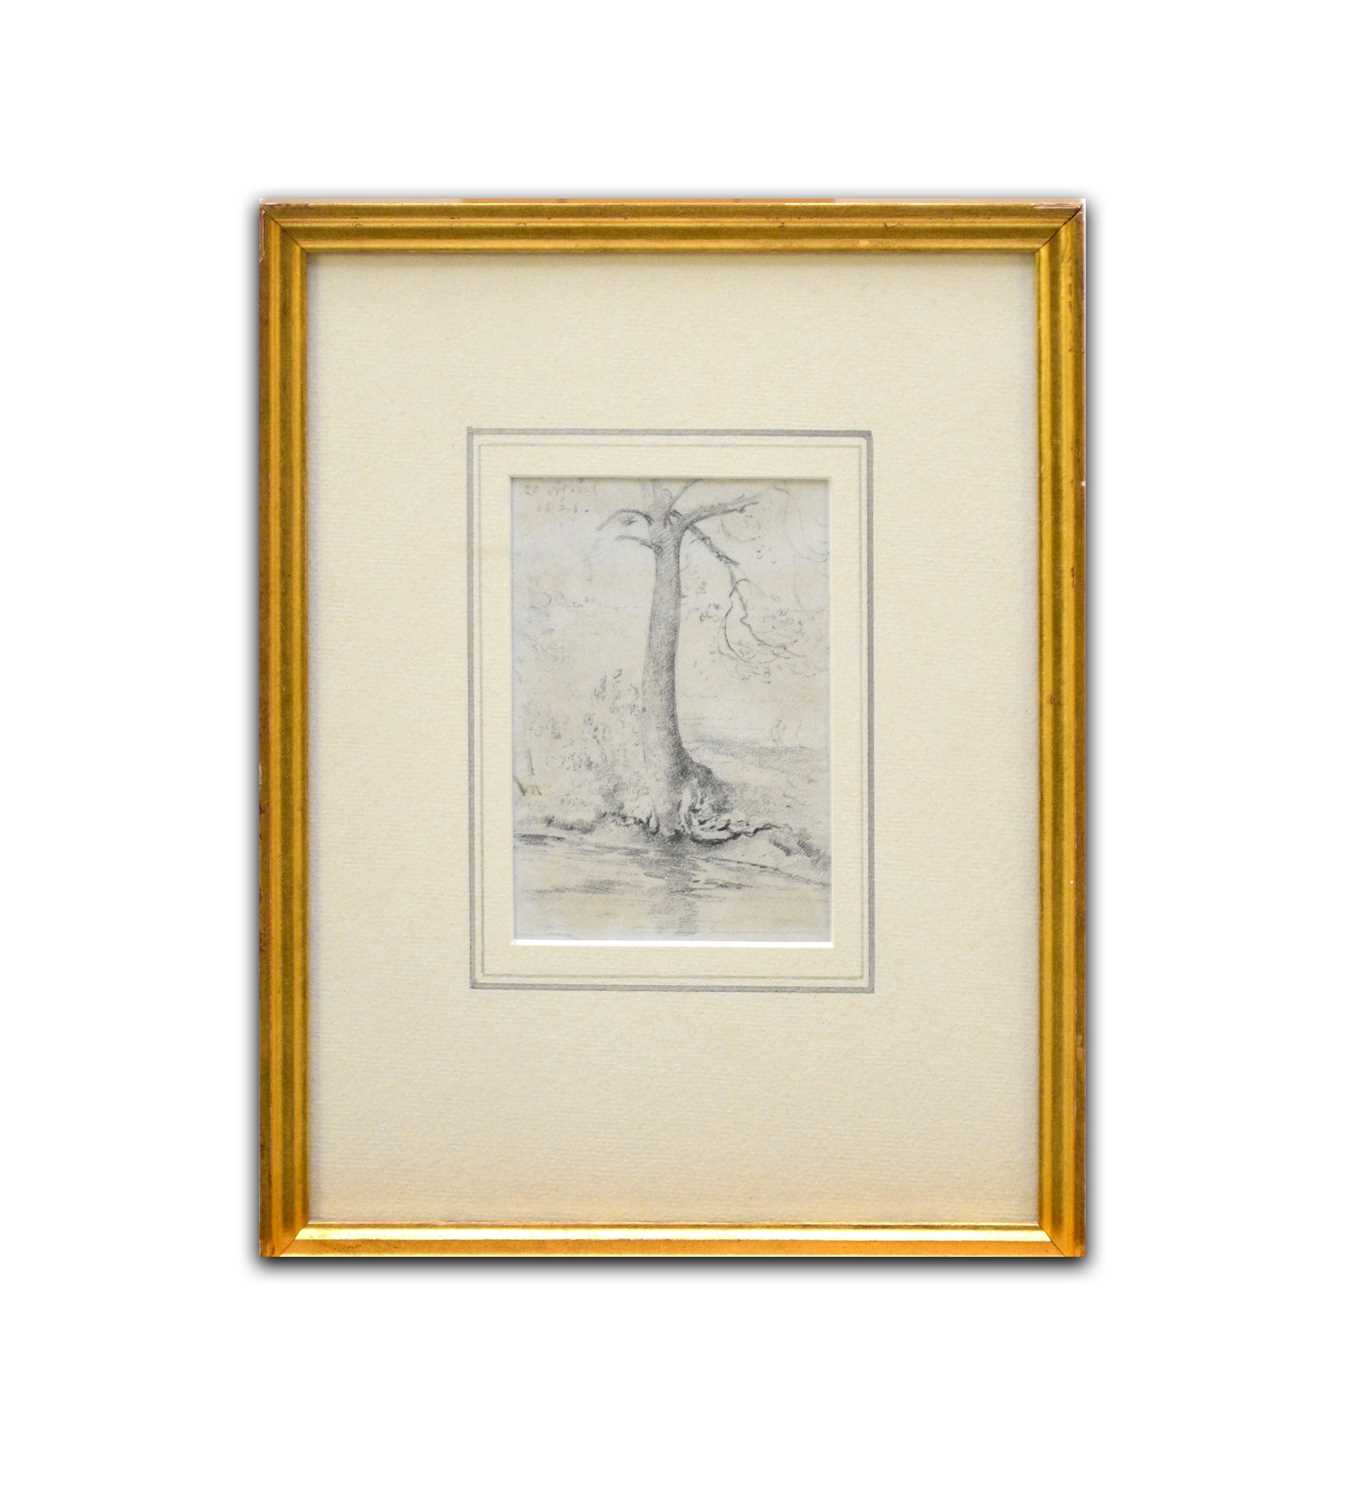 John Constable R.A. (1776 - 1837) A tree by the banks of a stream, pencil, 11.7cm x 8.9cm